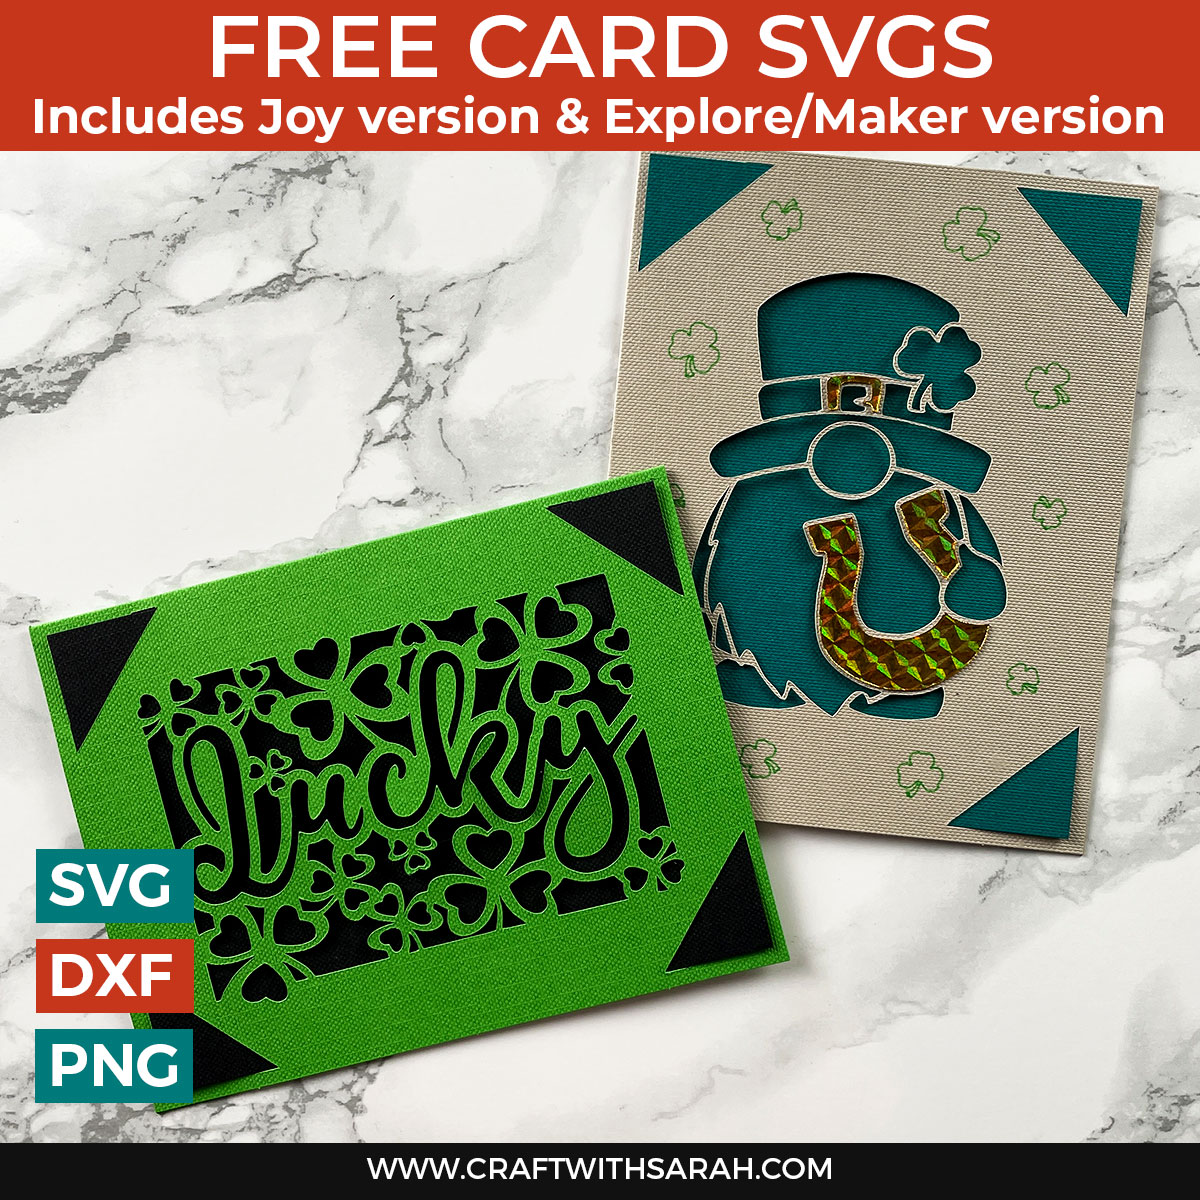 DIY St Patrick’s Day Cards: Free Insert Card SVGs